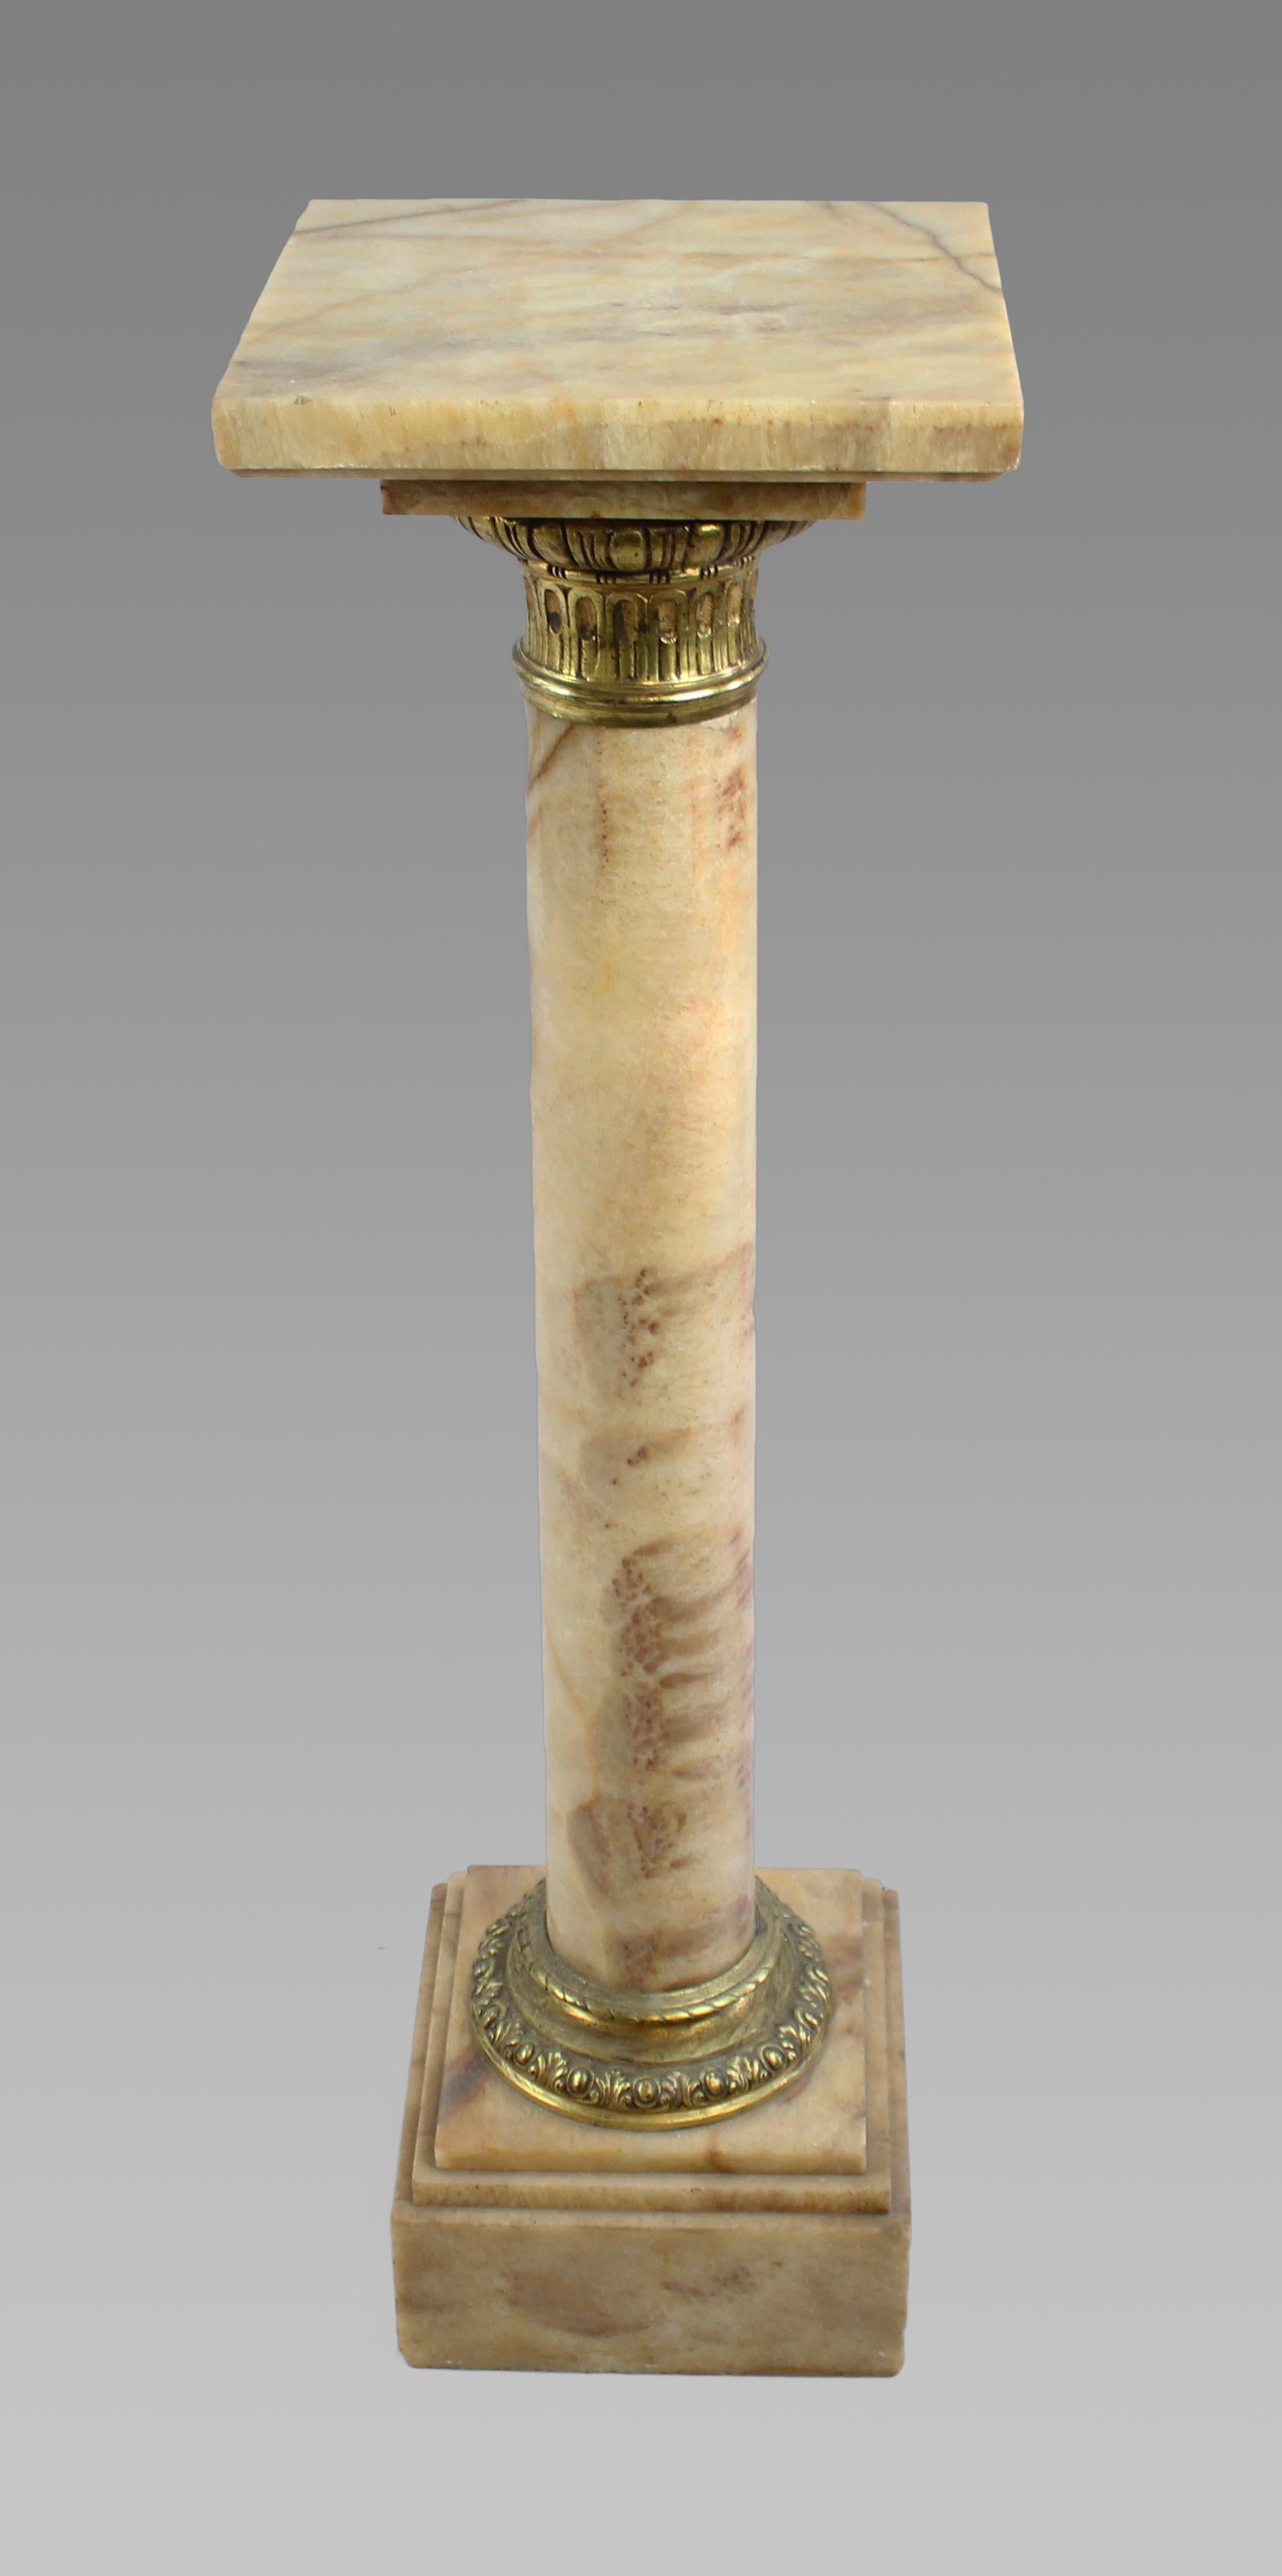 Variegated marble & gilt metal pedestal column


Measures: Top 30.5 x 30.5 cm 12 x 12 in

Height 107 cm 42 in


Period Mid 20th c.

Composition Marble, gilt metal

Condition Good condition. Very heavy. A little wear to marble